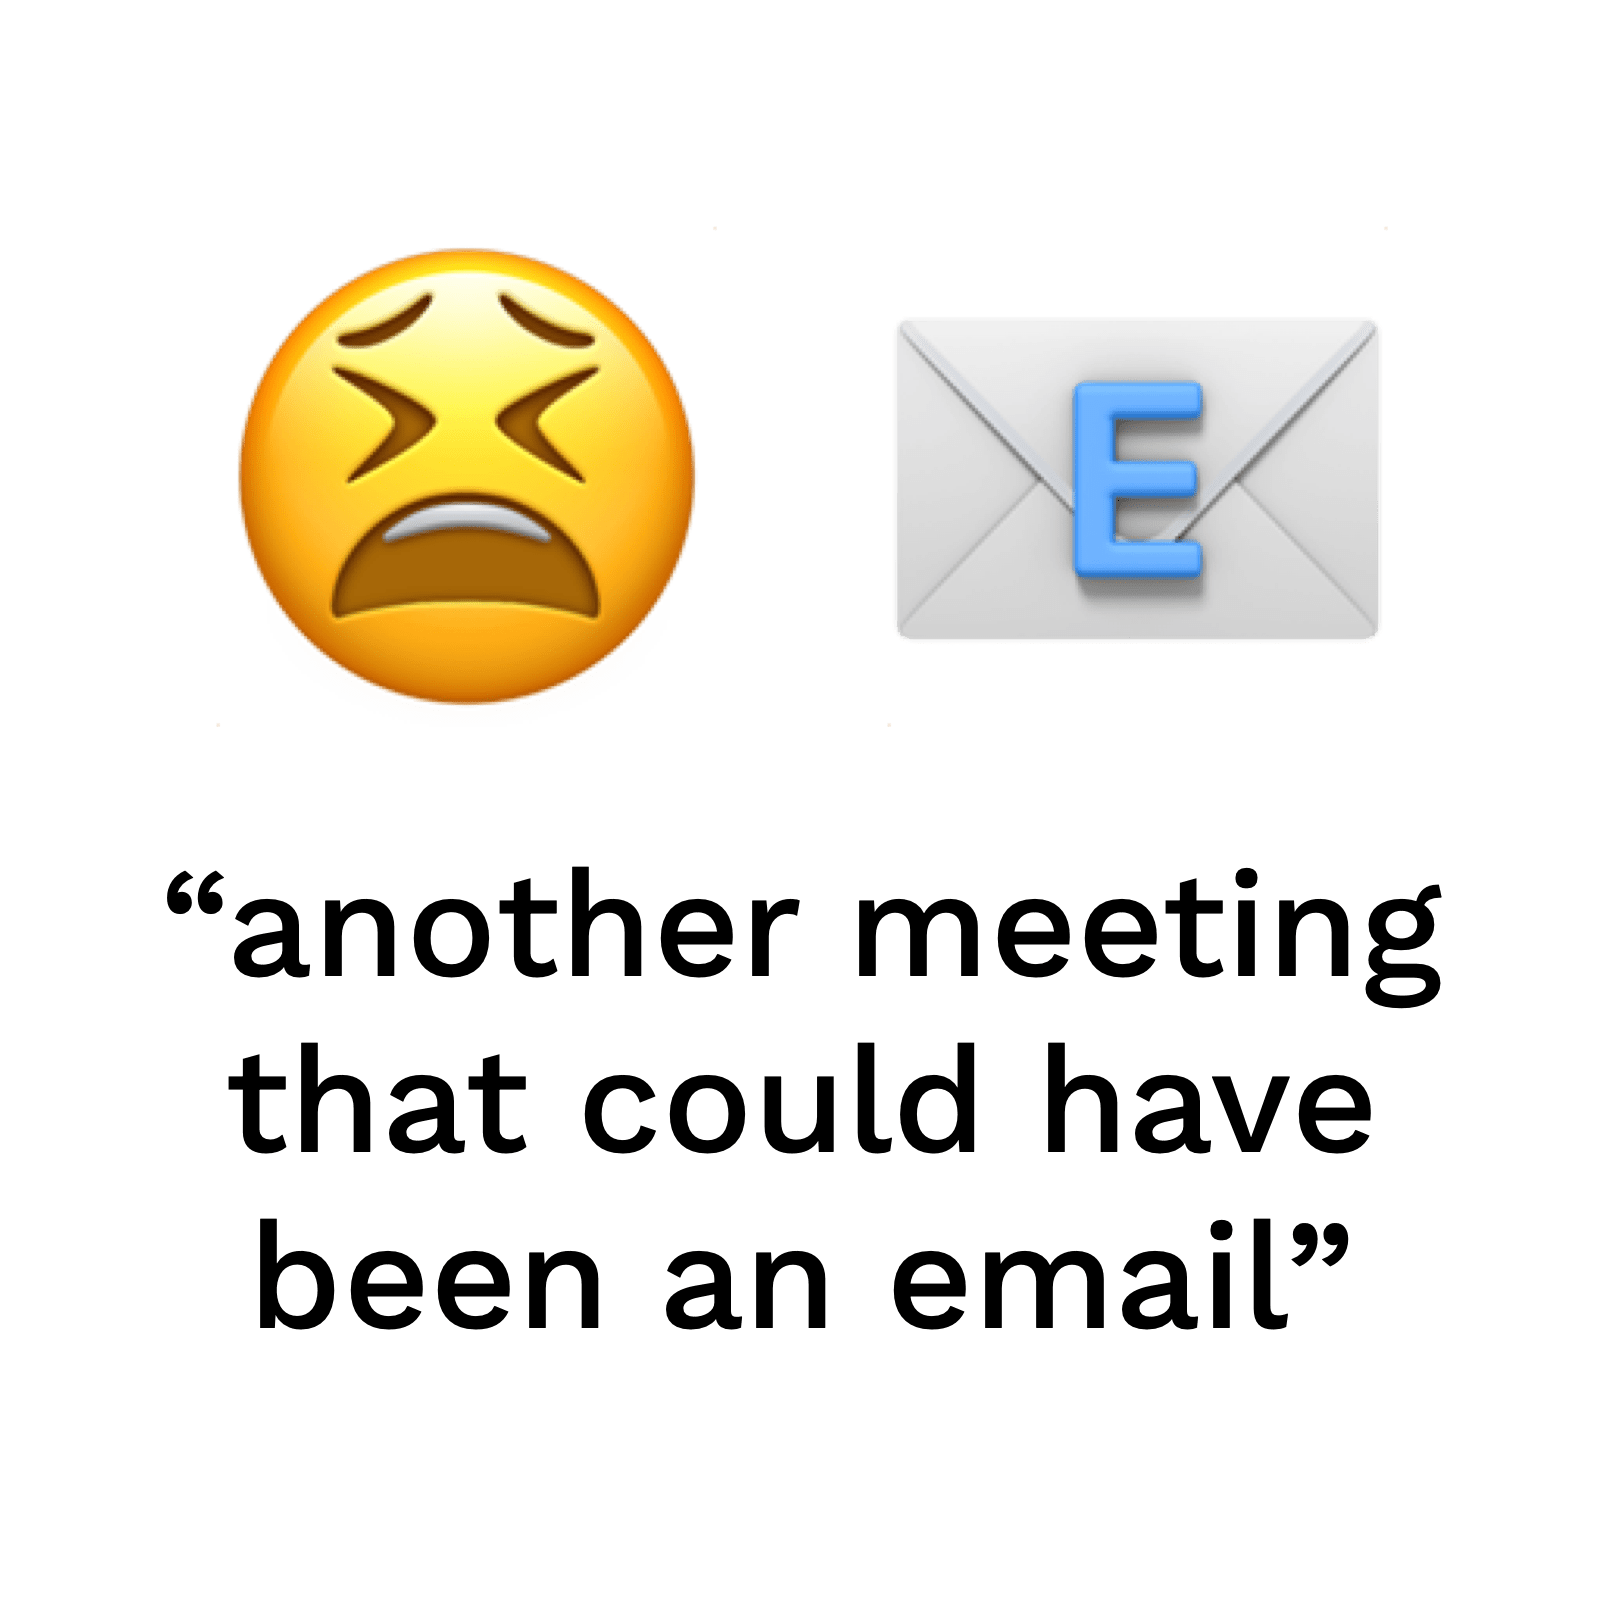 "ugh, another meeting that could have been an email"